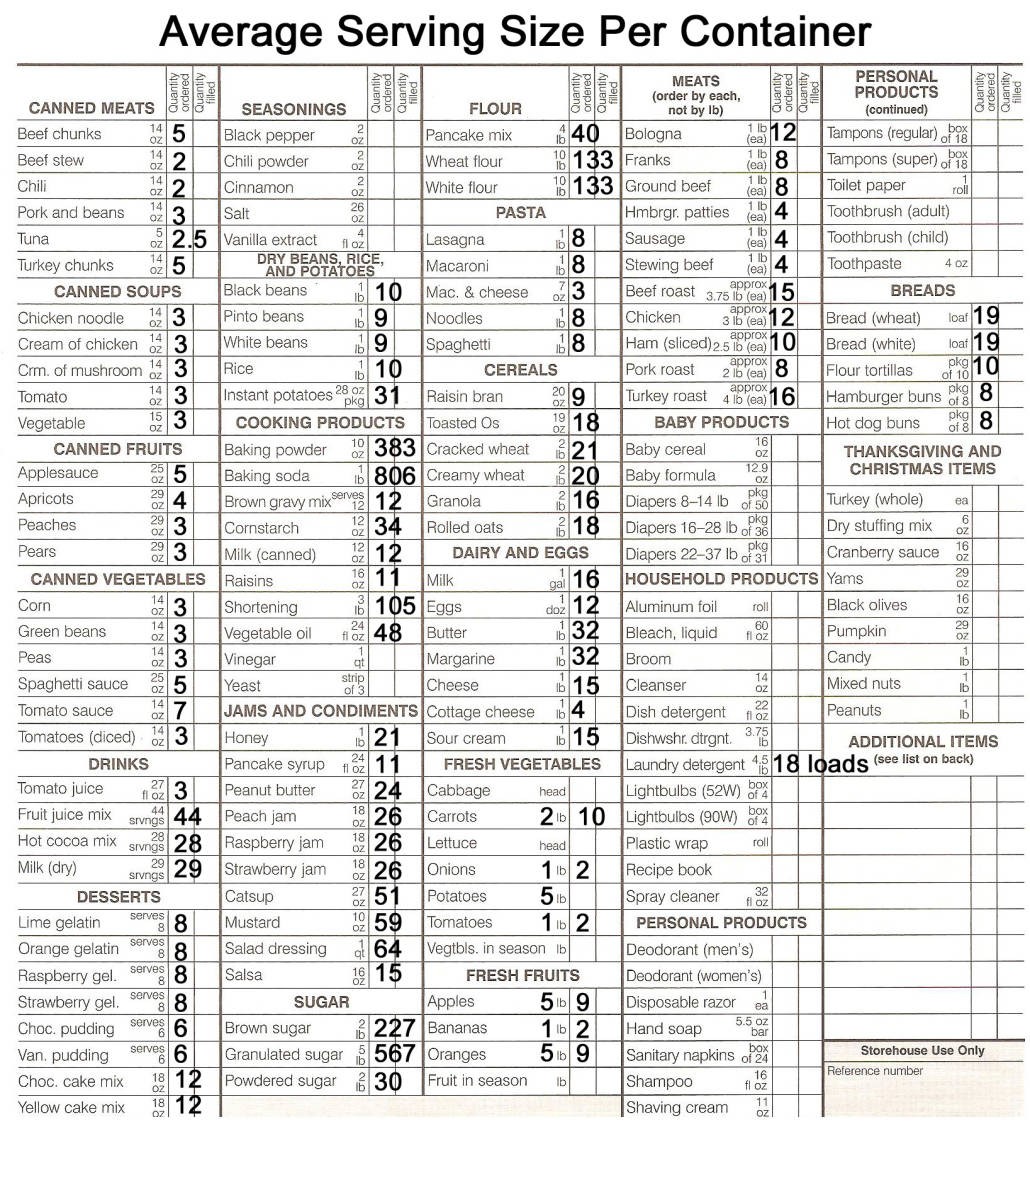 lds food order form 2019 pdf
 Food Order Servings Per Container Cheat Sheet | Leading LDS - lds food order form 2019 pdf